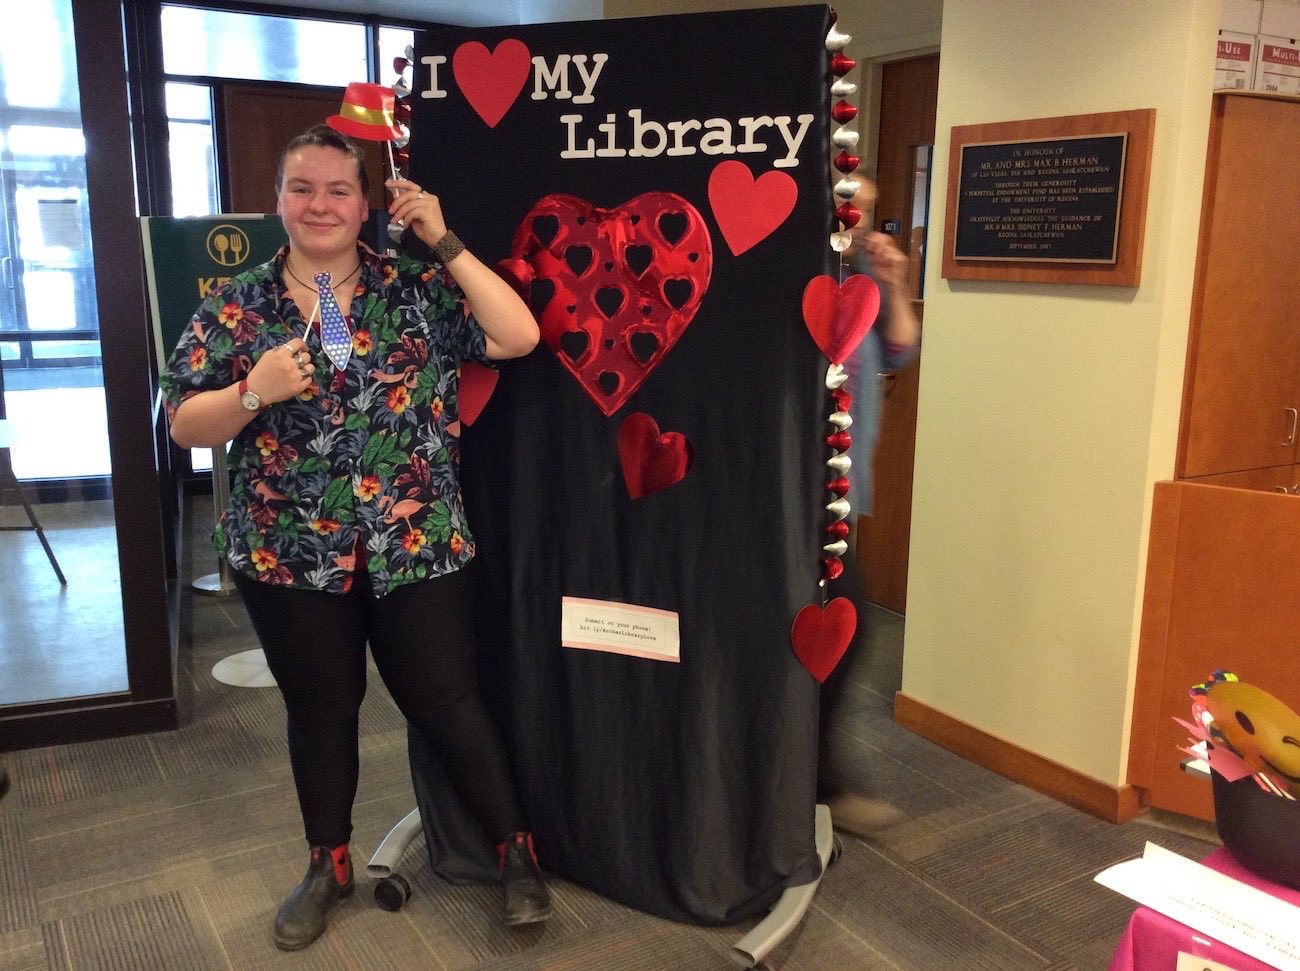 A smiling student stands in front of the I love my Library backdrop holding a prop red hat on a stick and a prop necktie on a stick up as though she is wearing them